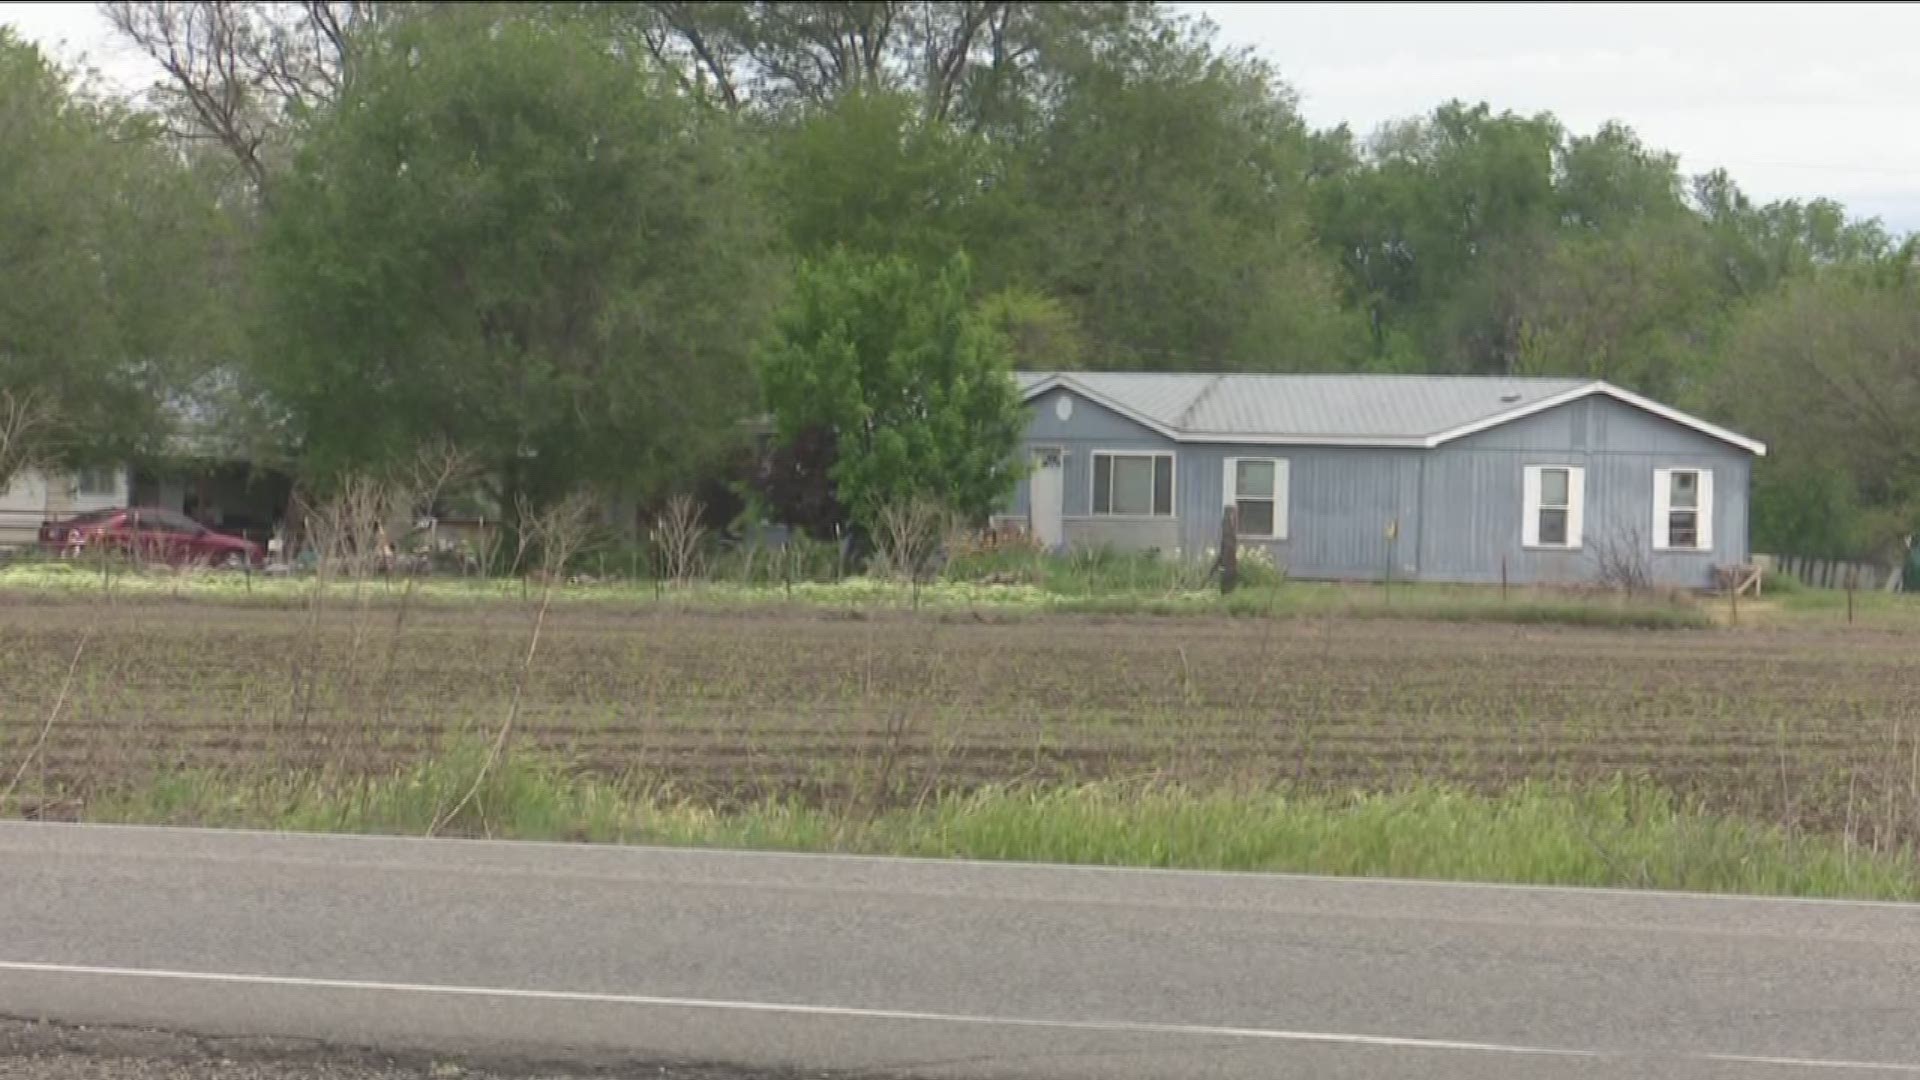 The Malheur County sheriff says the shooting happened outside a home Wednesday night.